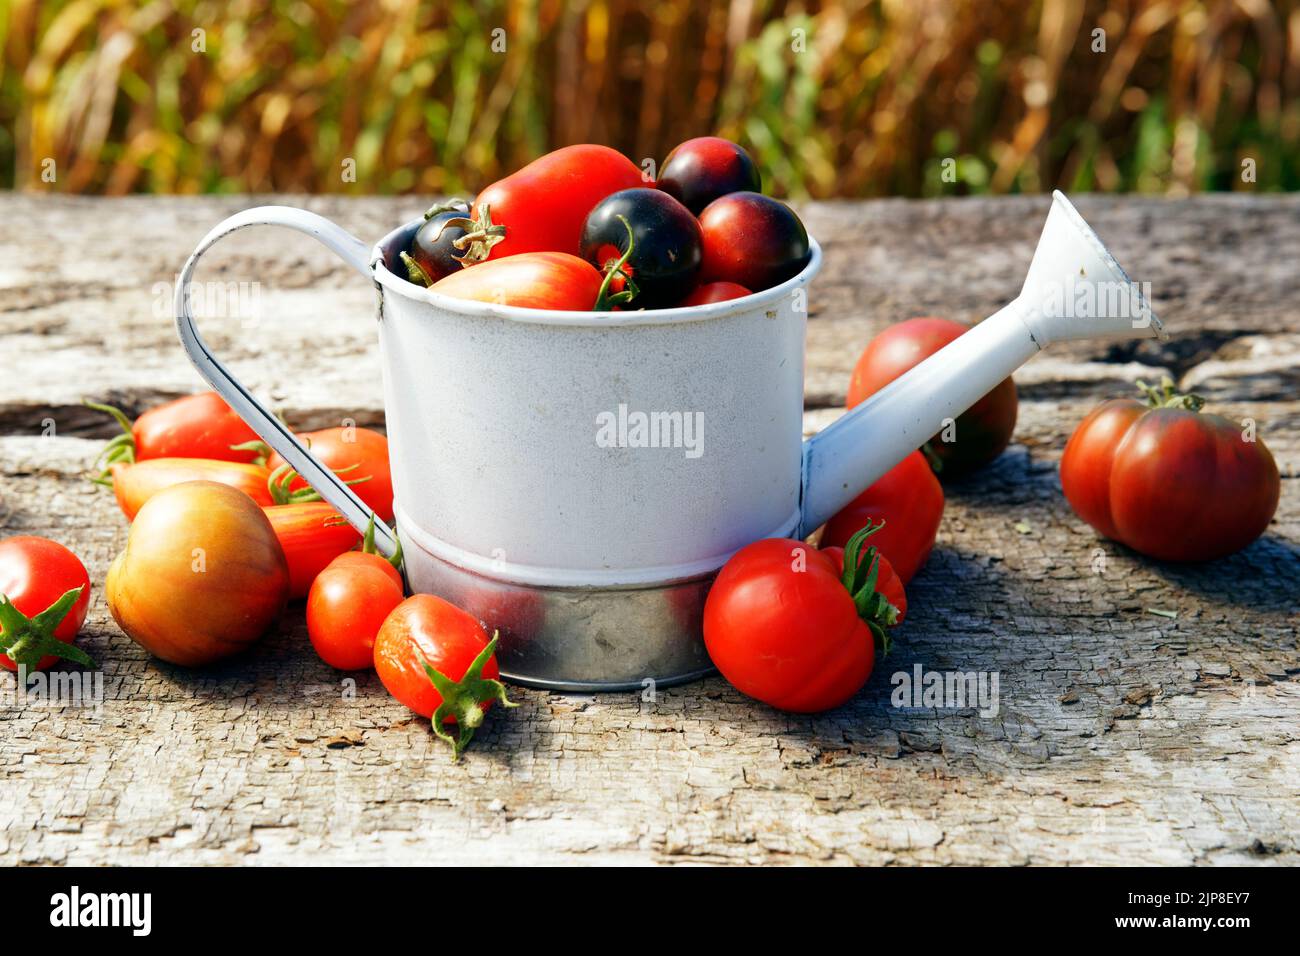 Vegetable garden tomatoes, garden tomatoes in a small watering can Stock Photo